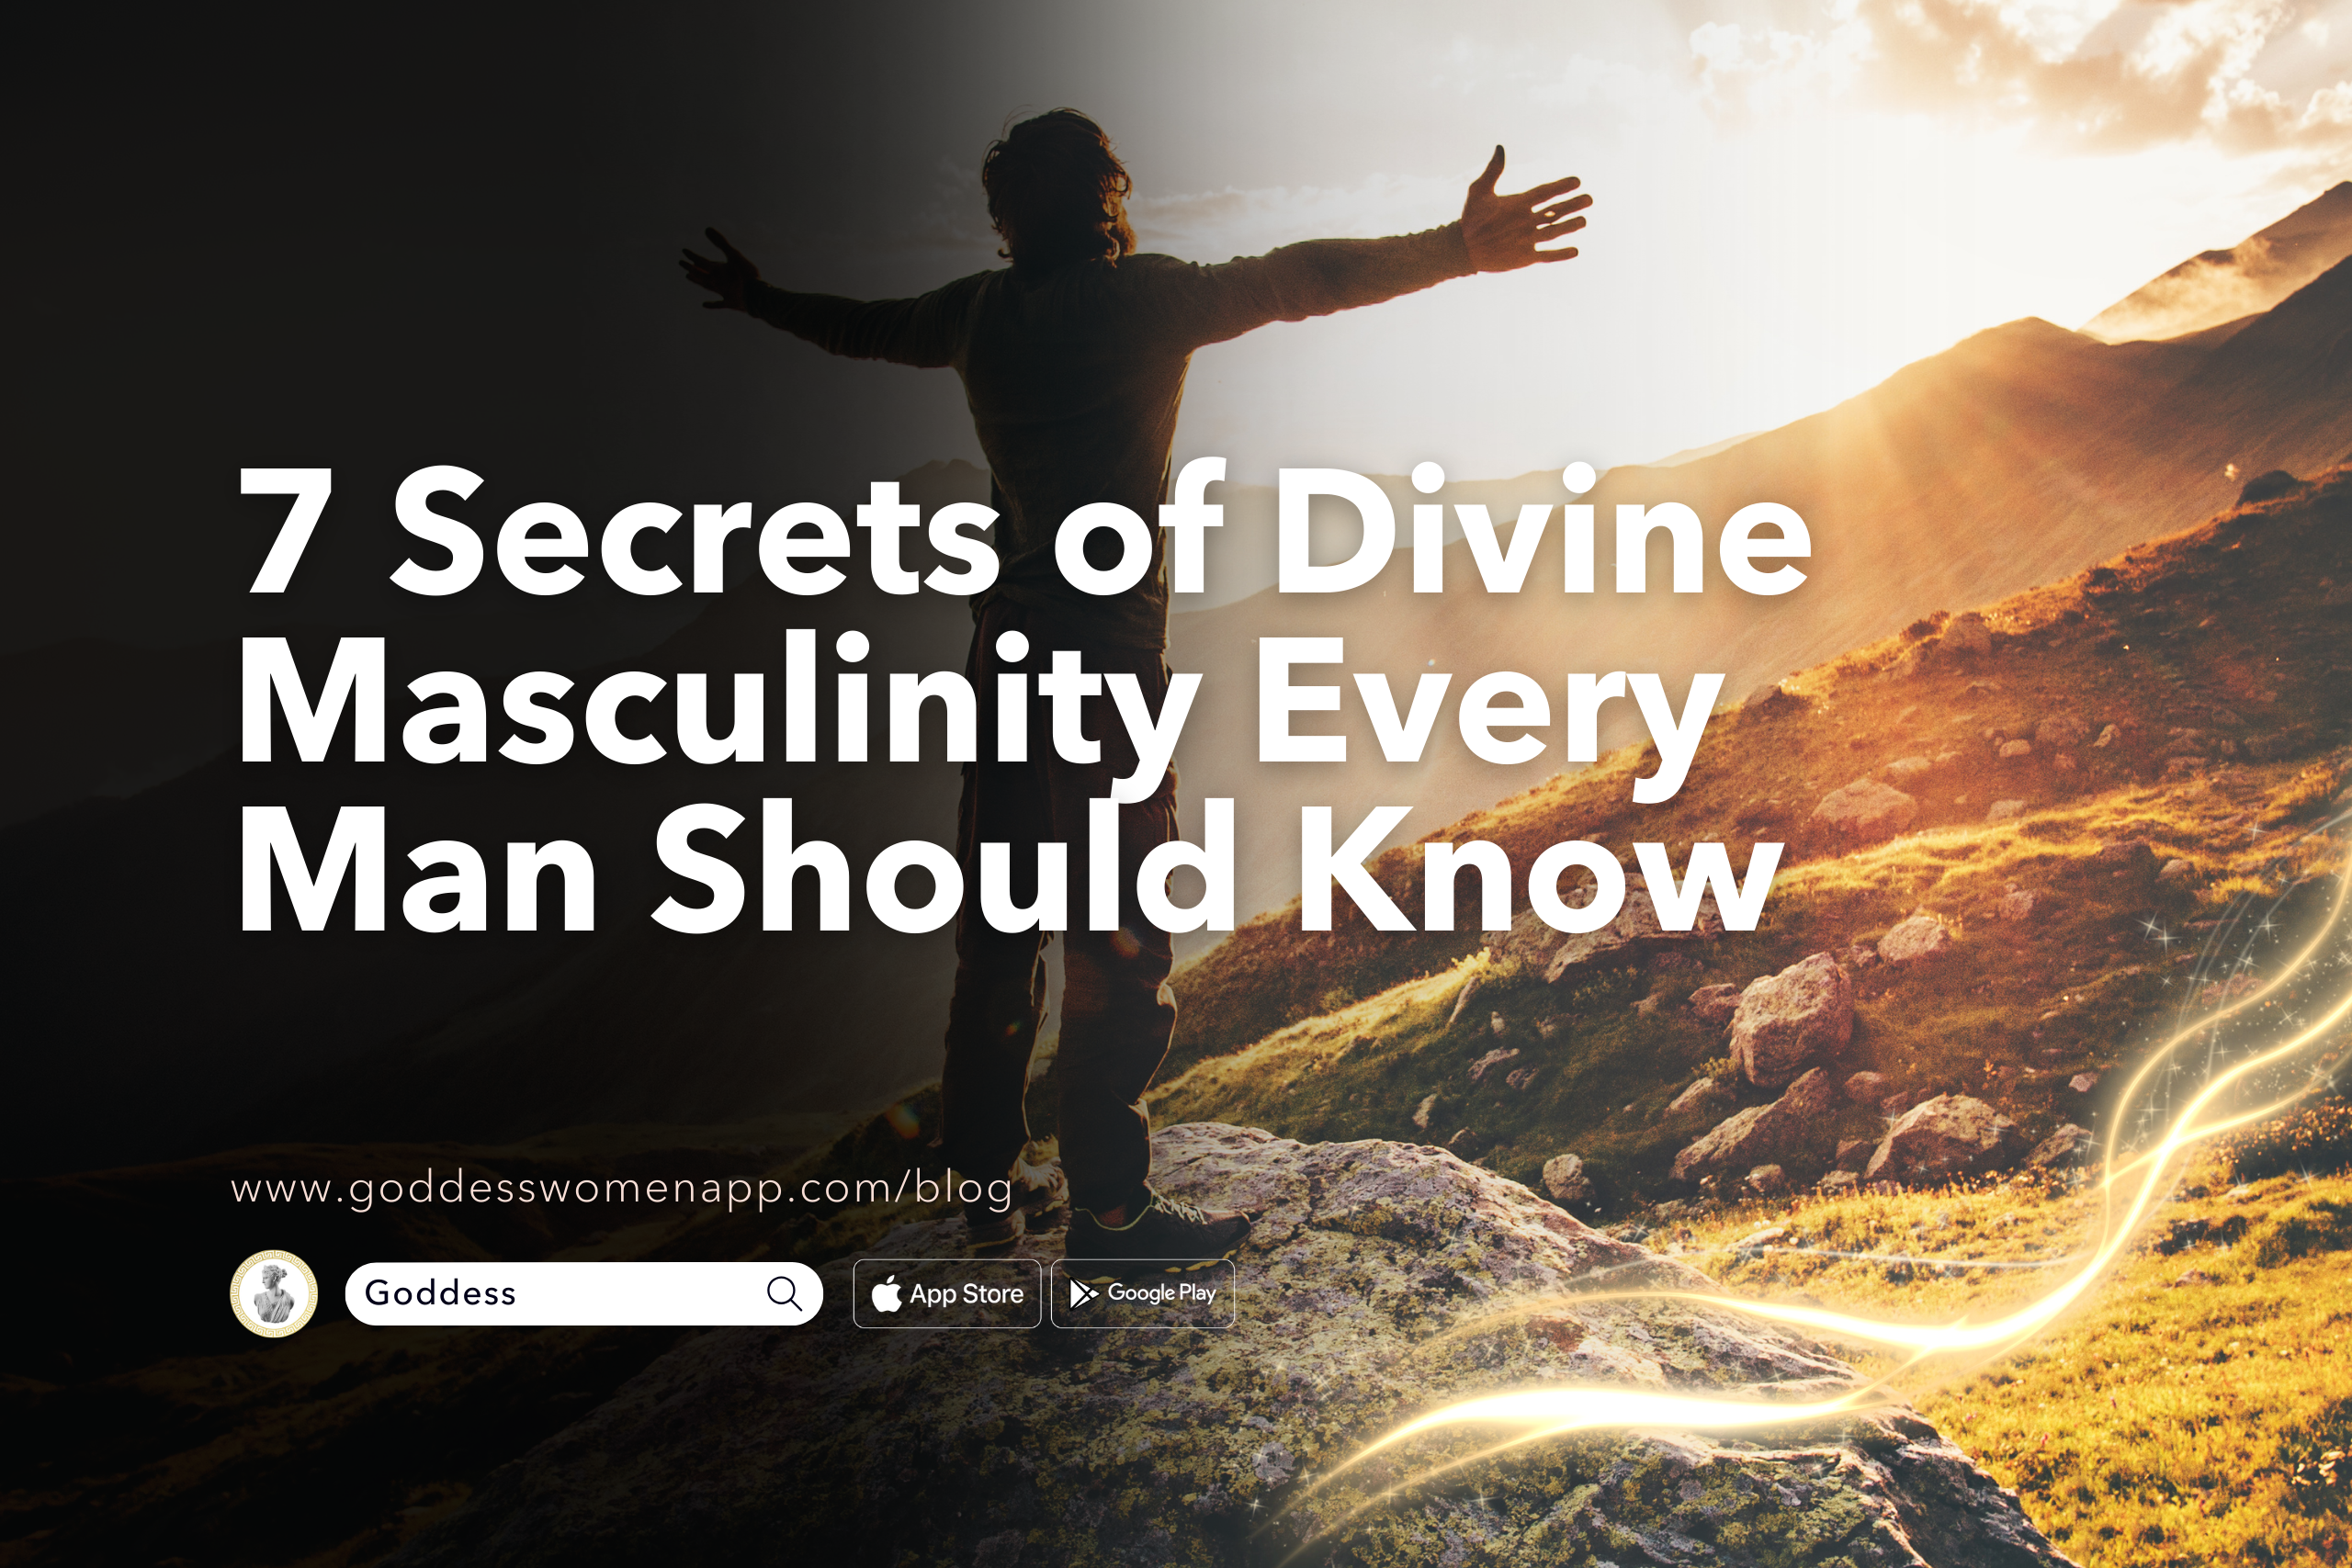 7 Secrets of Divine Masculinity Every Man Should Know